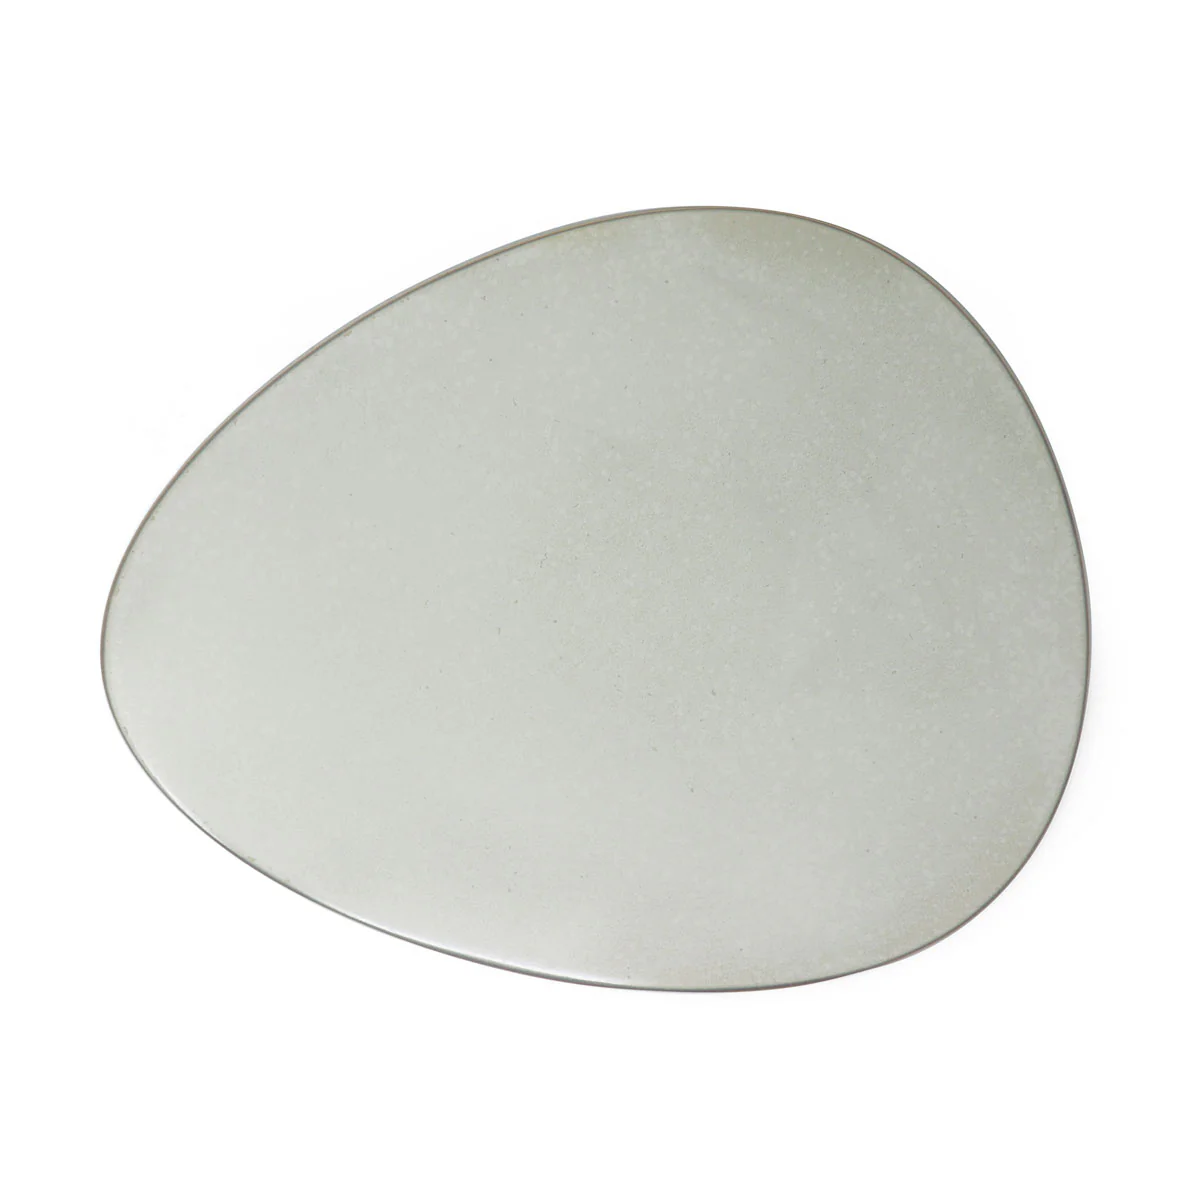 SONG Perle - Oval placemat